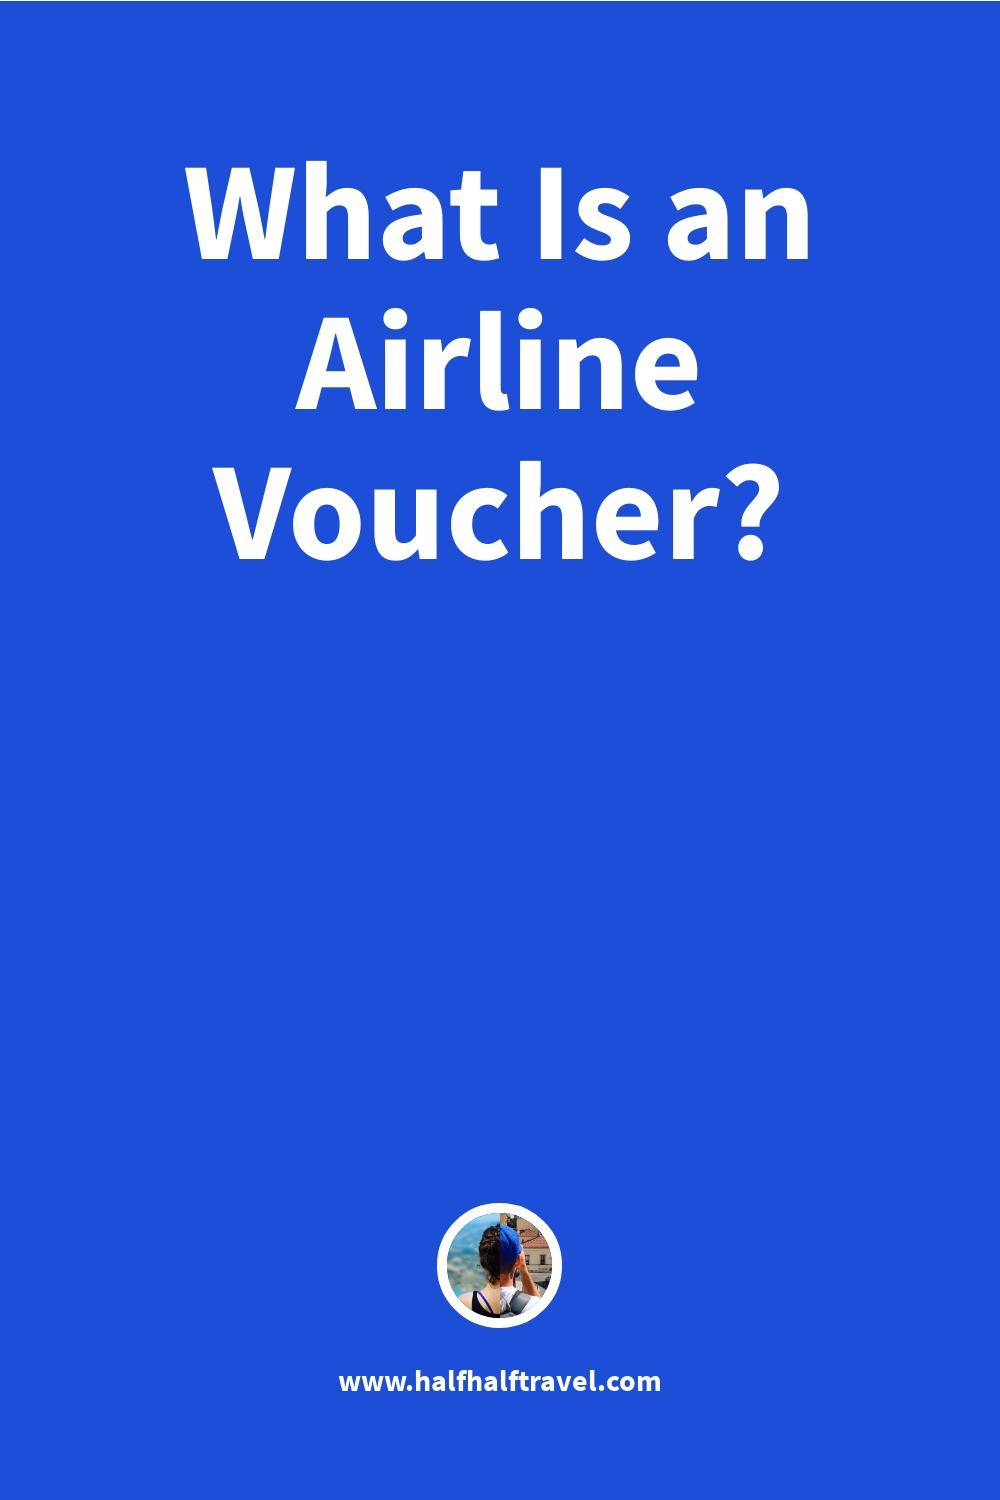 Pinterest image from the 'What is an Airline Voucher?' article on Half Half Travel